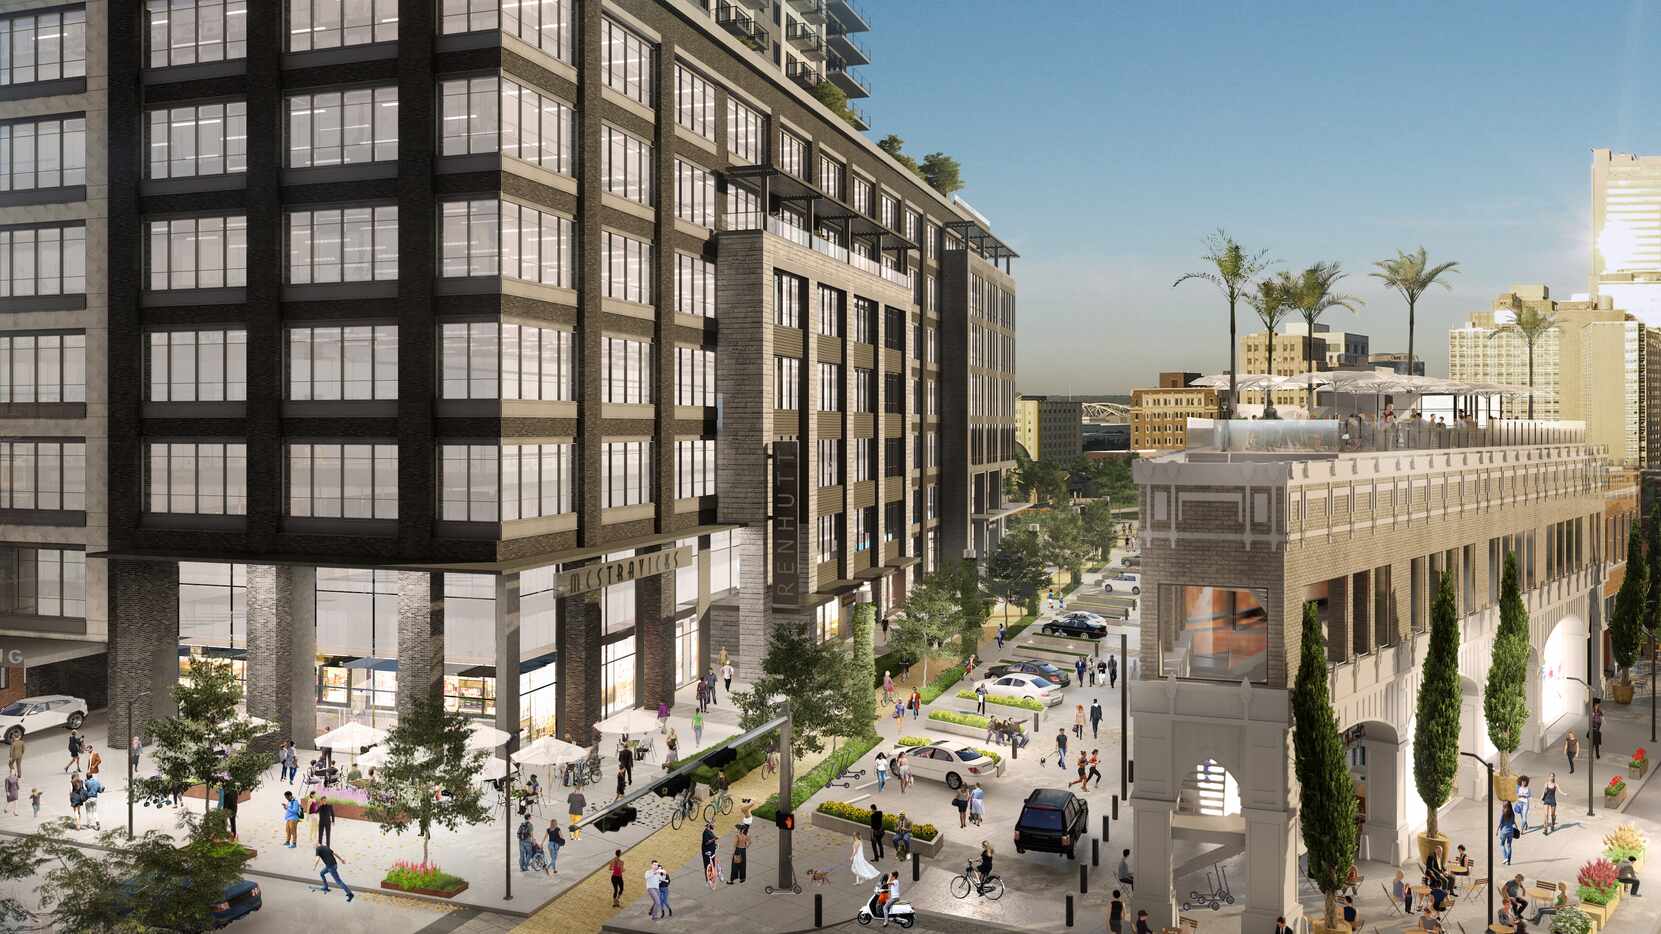 The retail, office and residential tower will be across the street from the landmark...